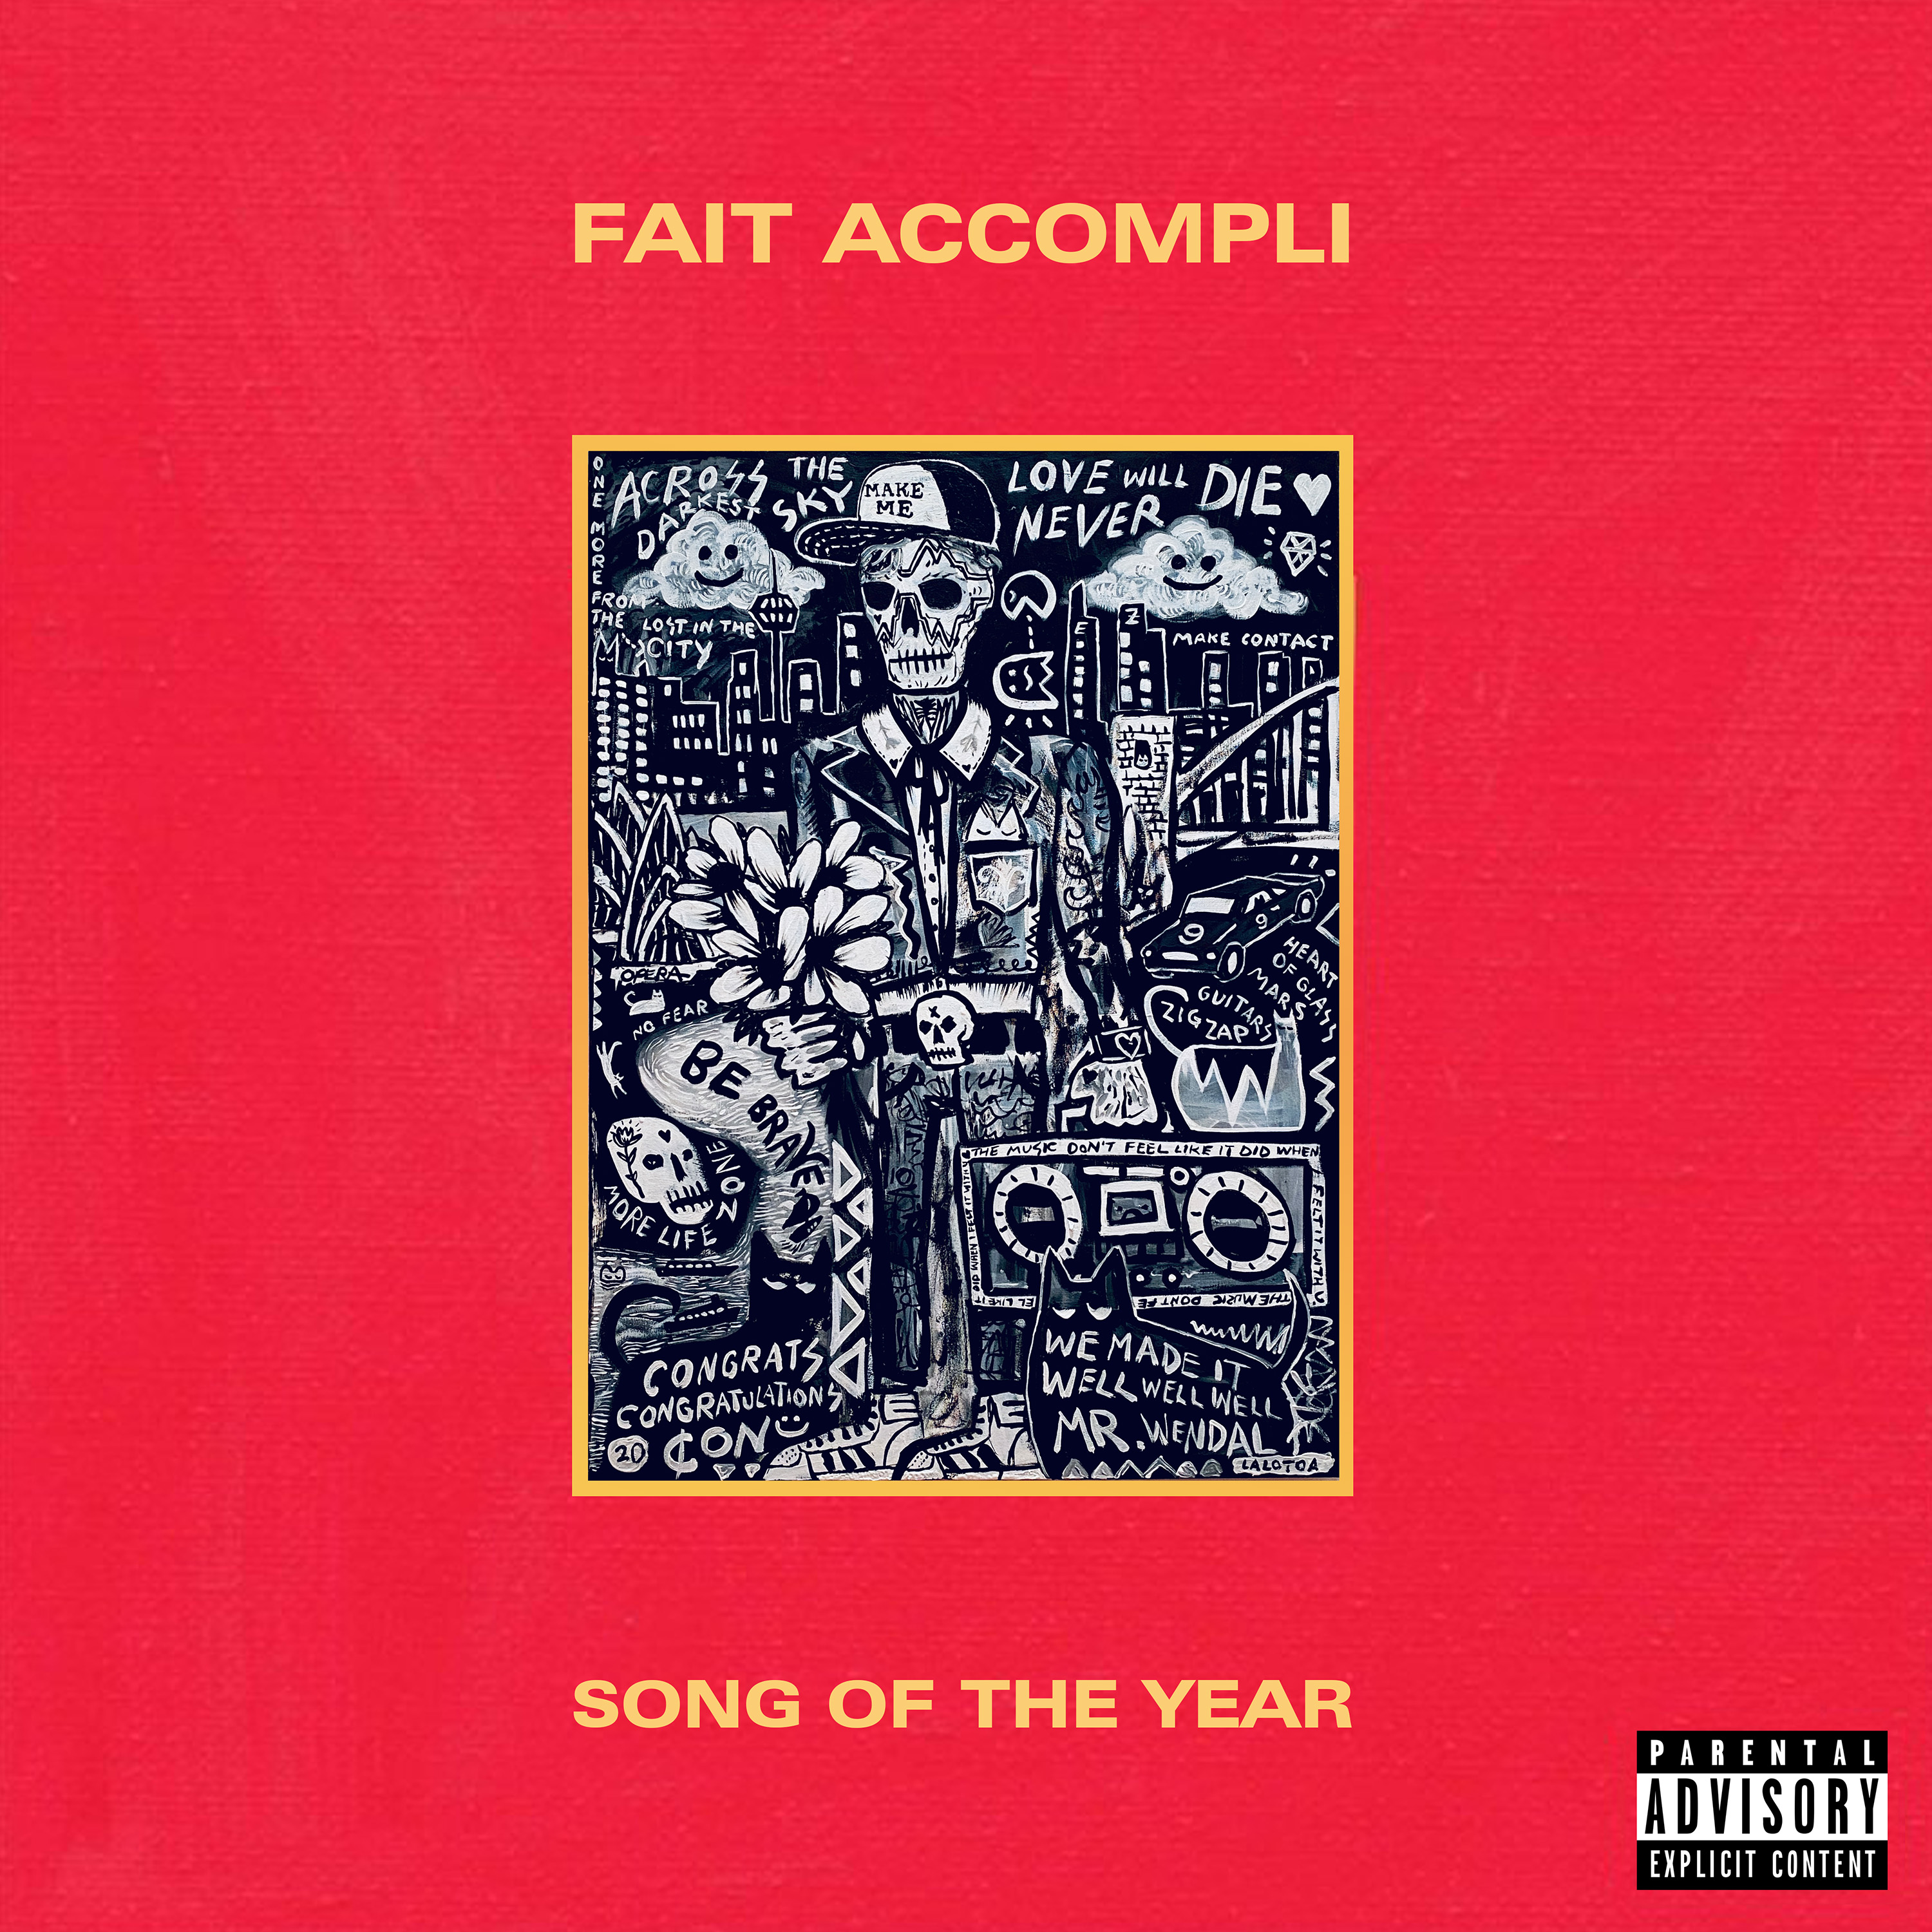 FAIT ACCOMPLI SONG OF THE YEAR ONLINE ART